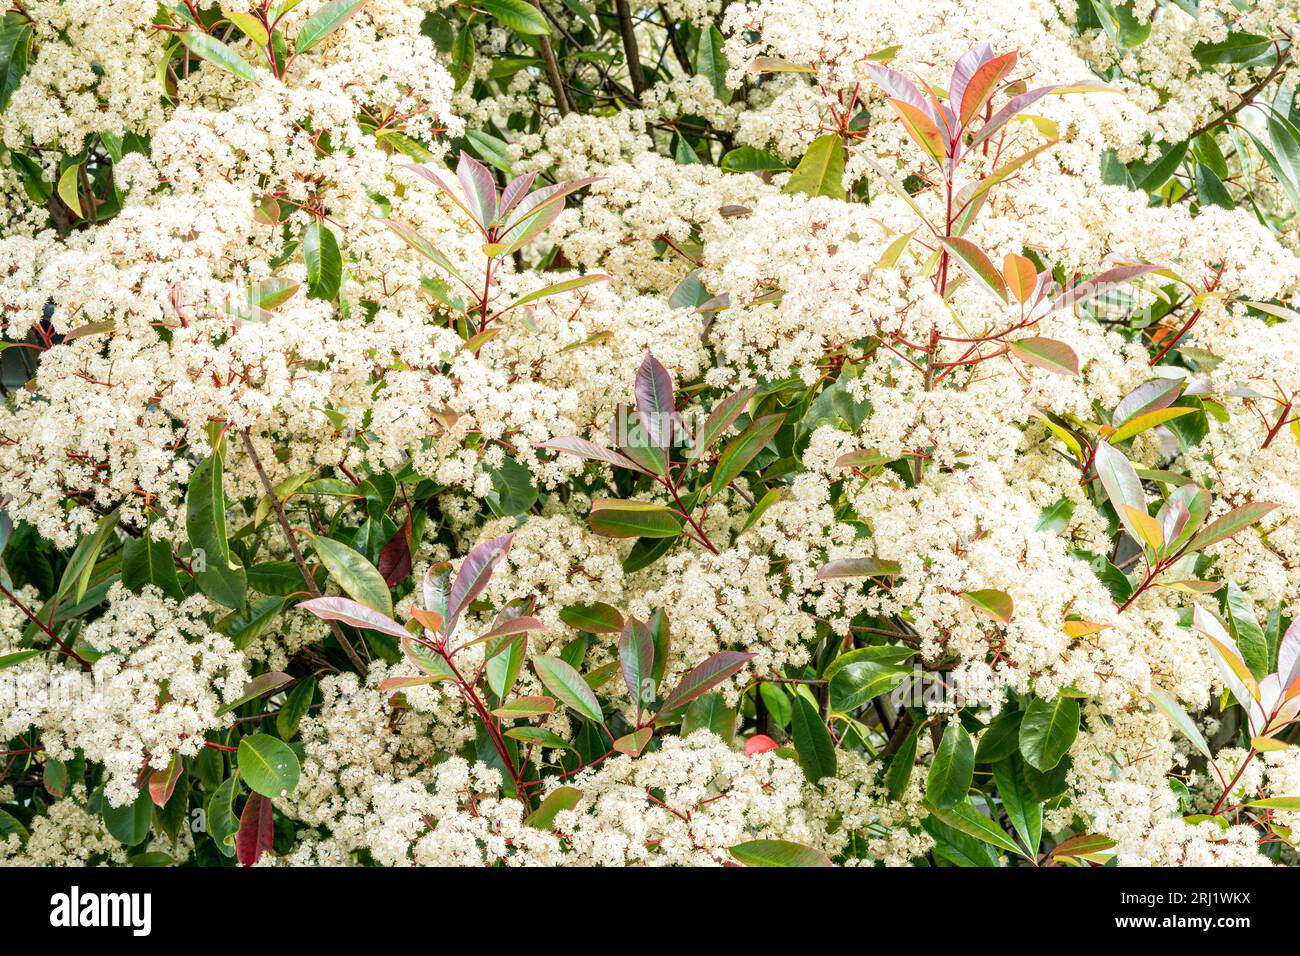 White blossoms on a European-mountain ash tree, sorbus aucuparia. Blossoms and green leaves fill the frame completely. Stock Photo